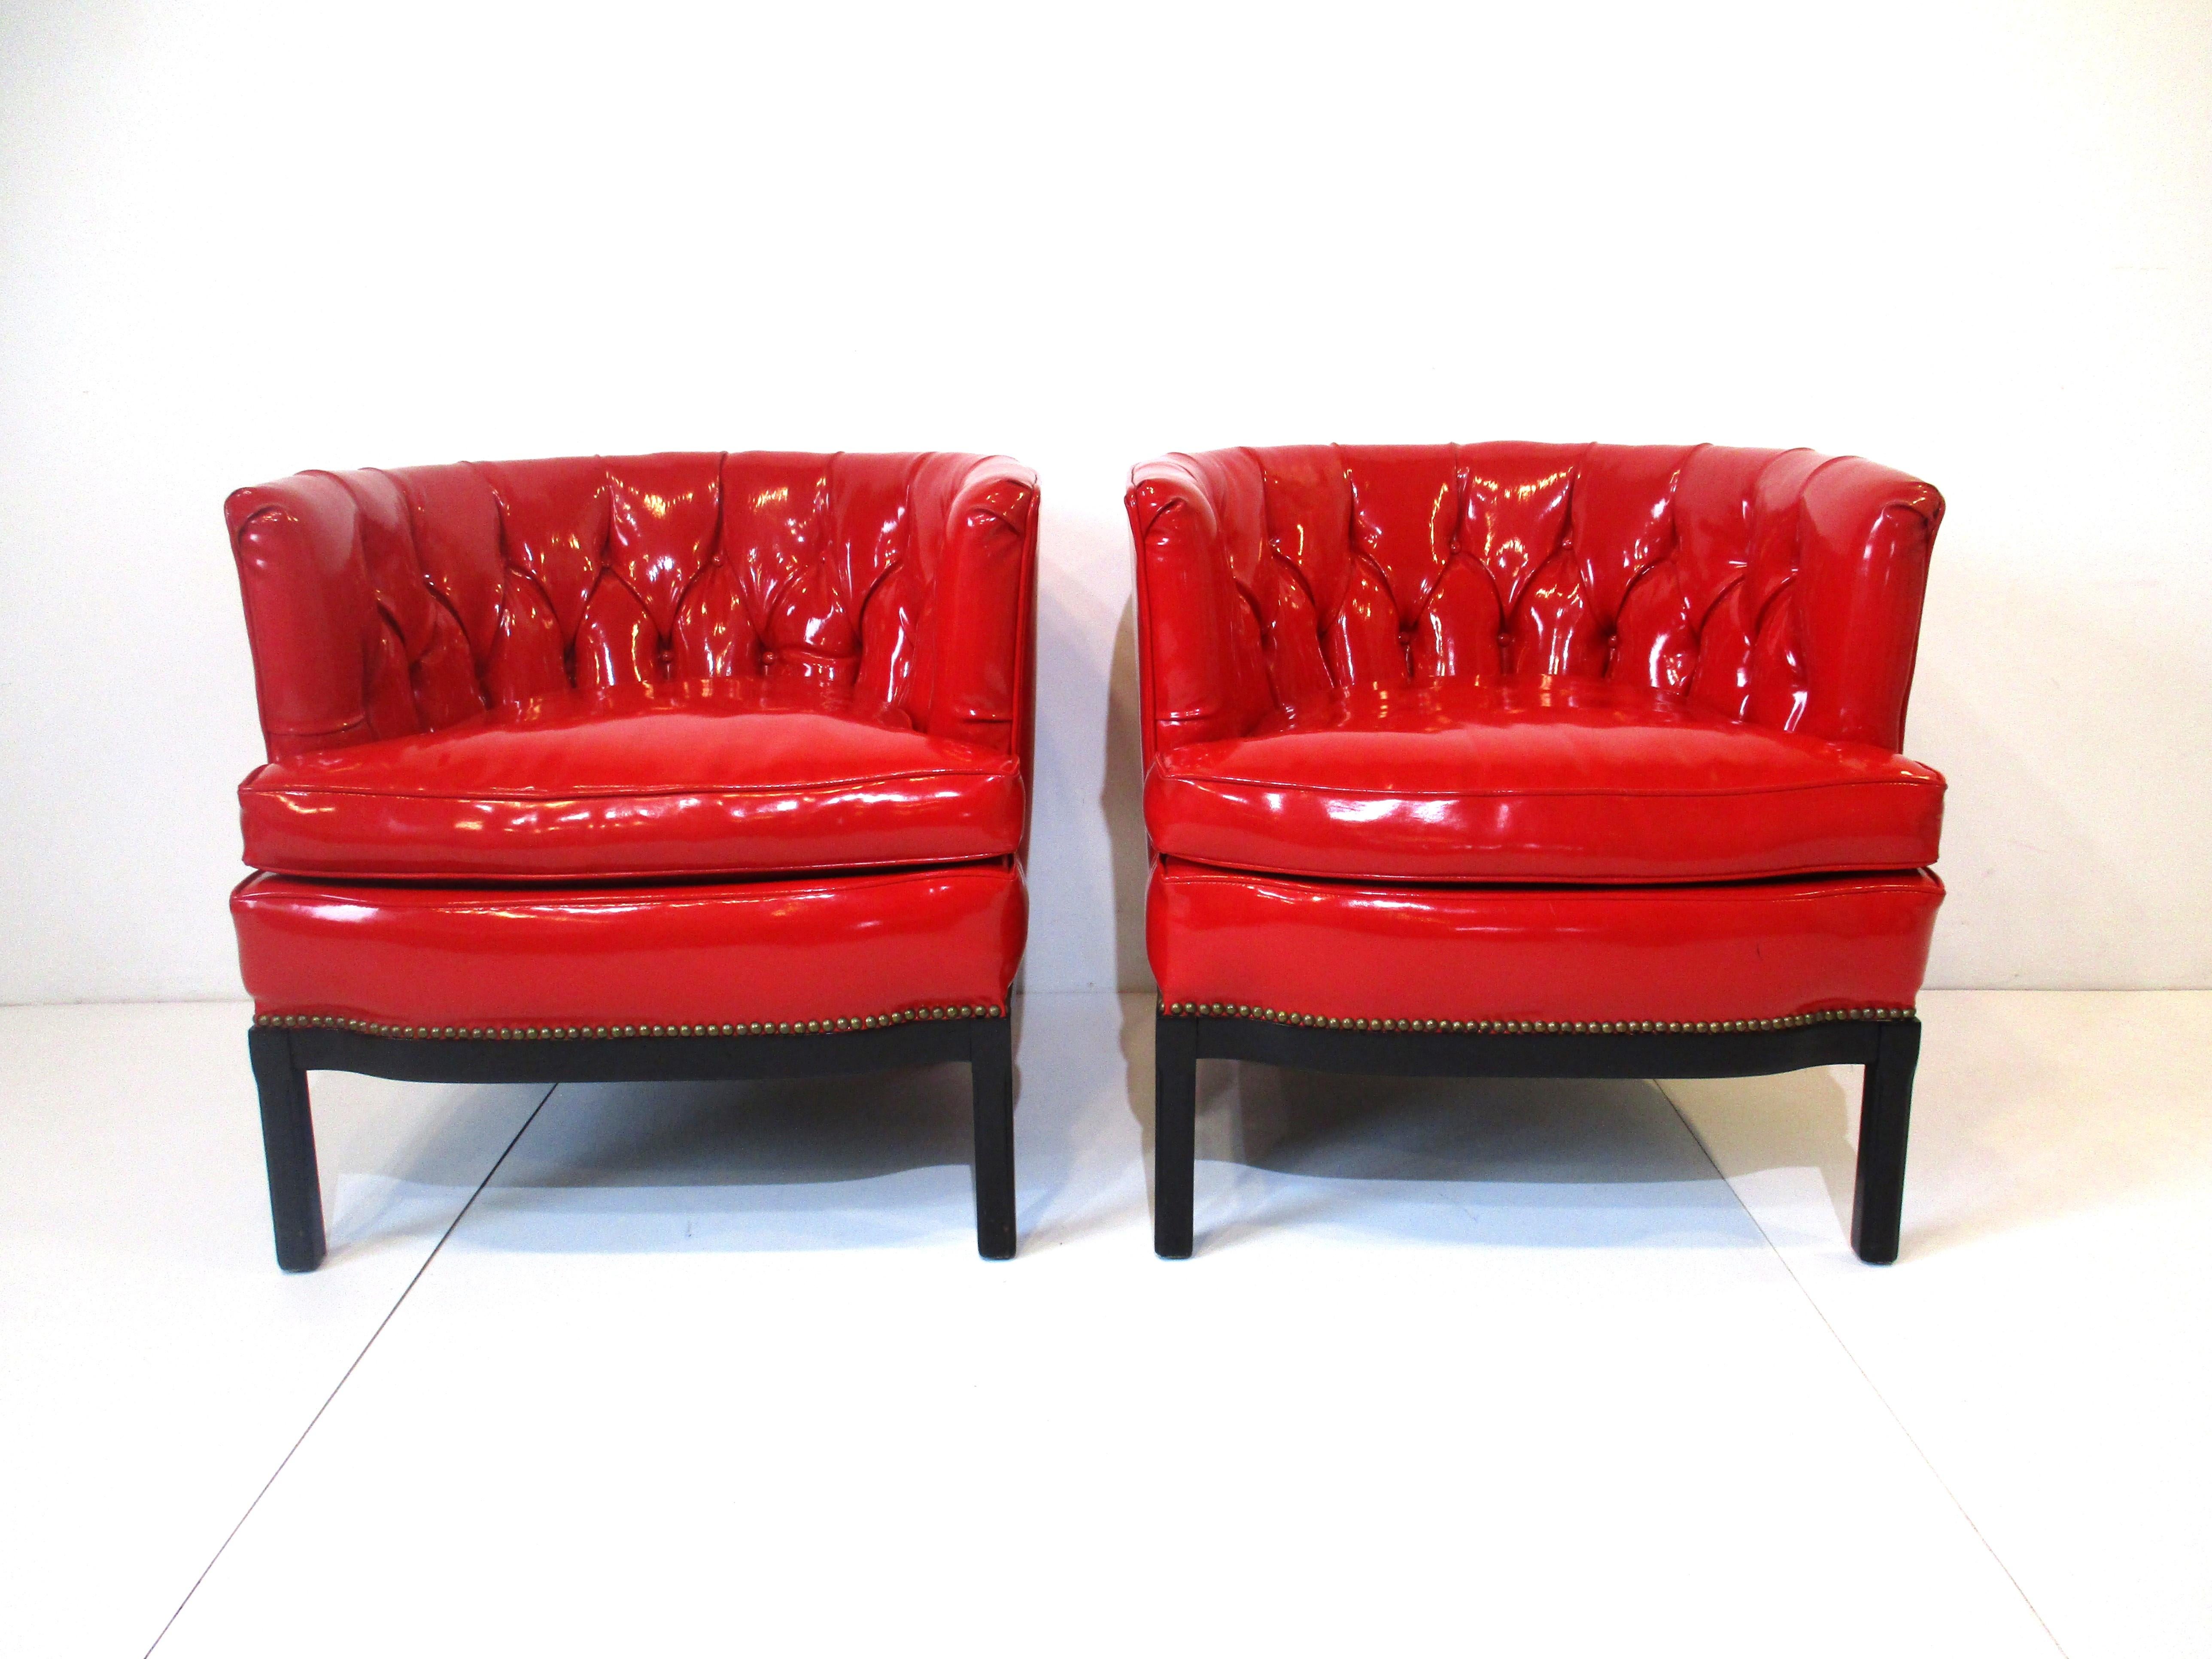 Liquid Red Club Chairs by Erwin Lambeth In Good Condition For Sale In Cincinnati, OH